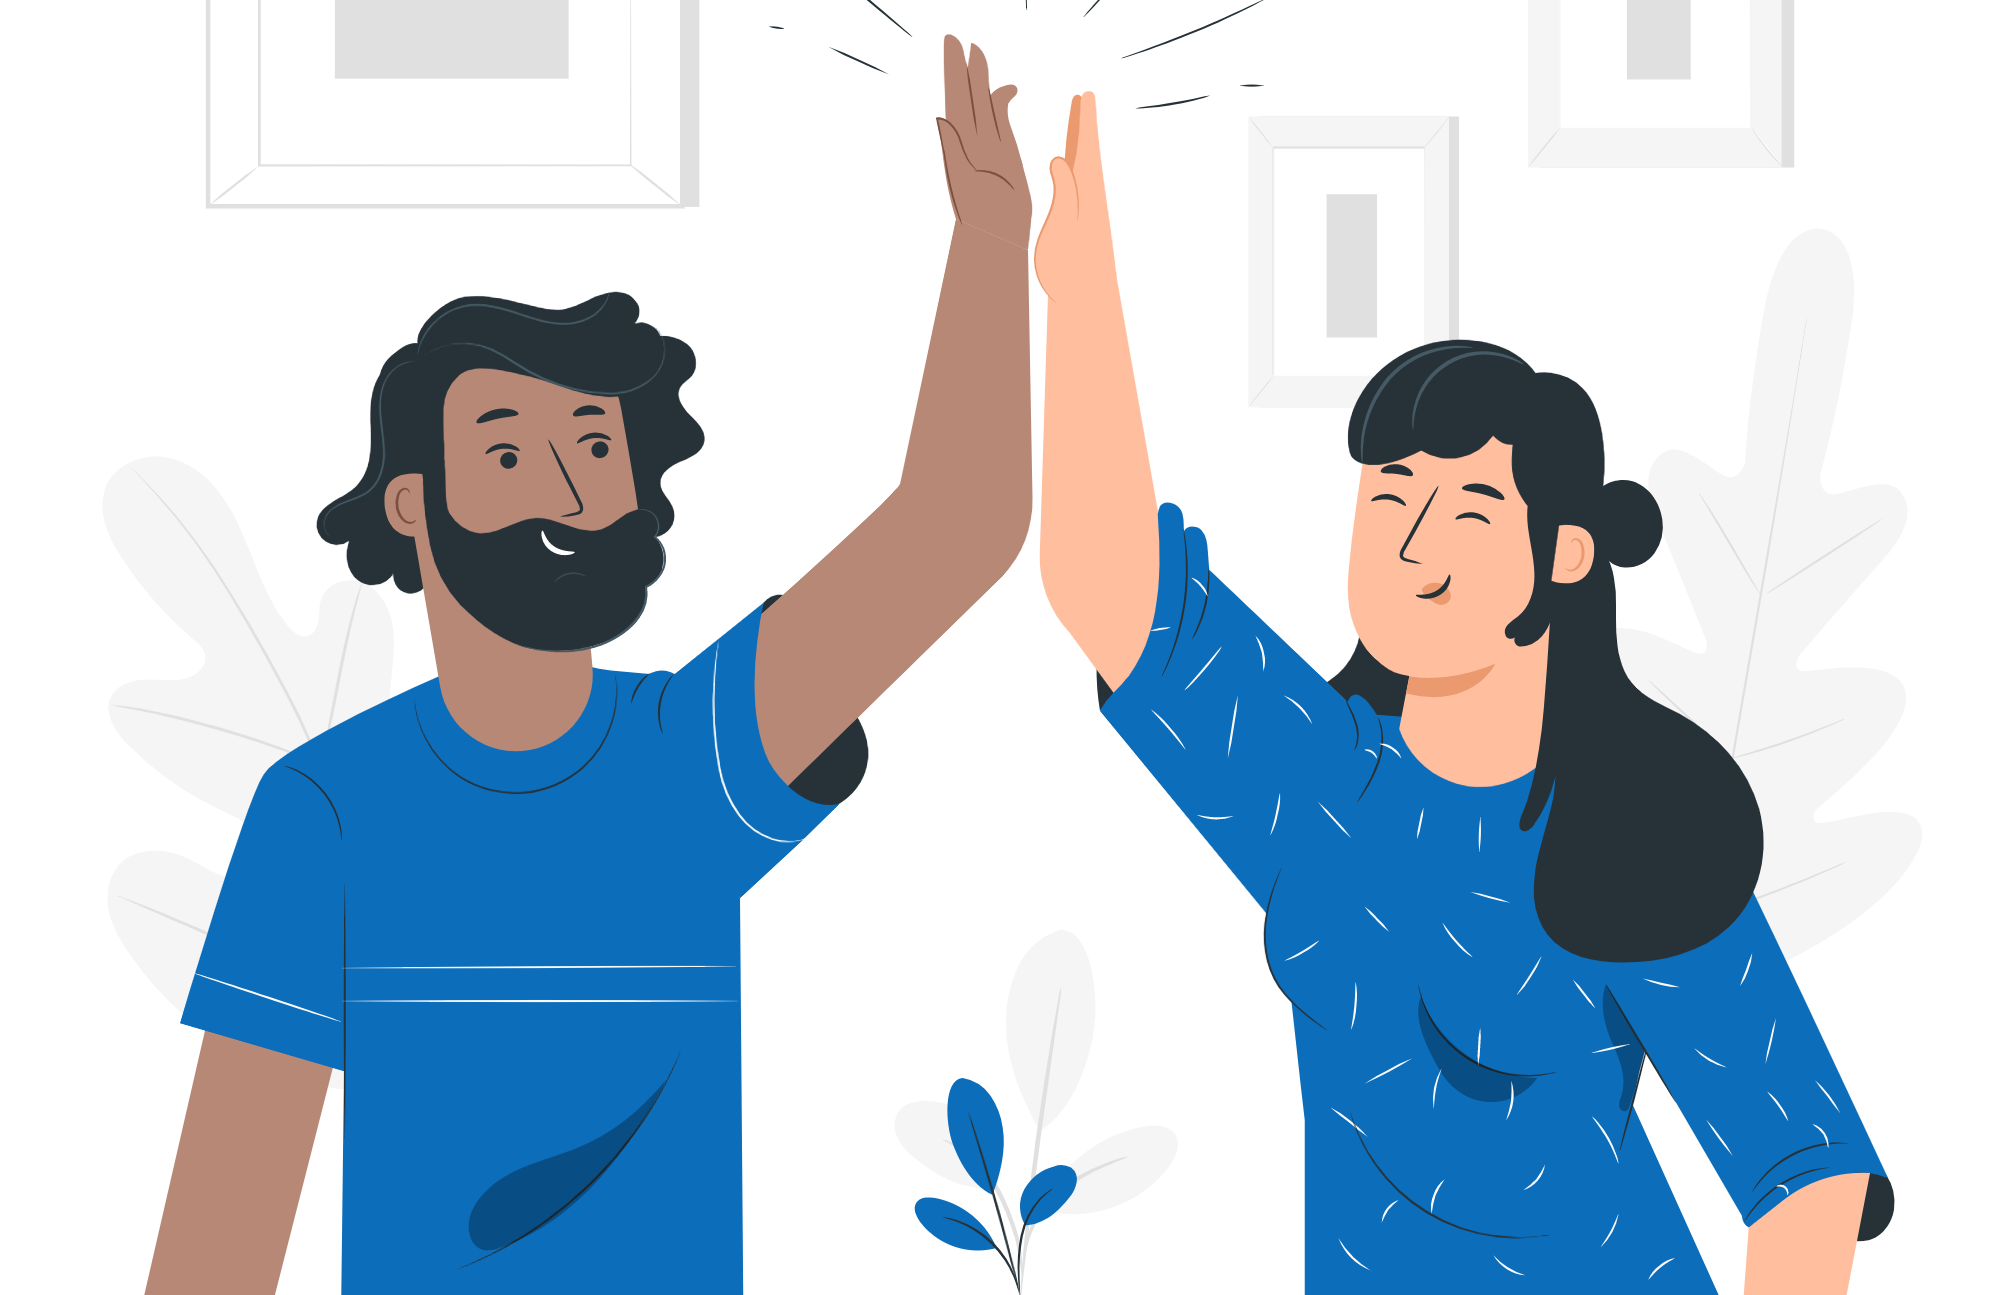 illustration of two people smiling and high-fiving each other